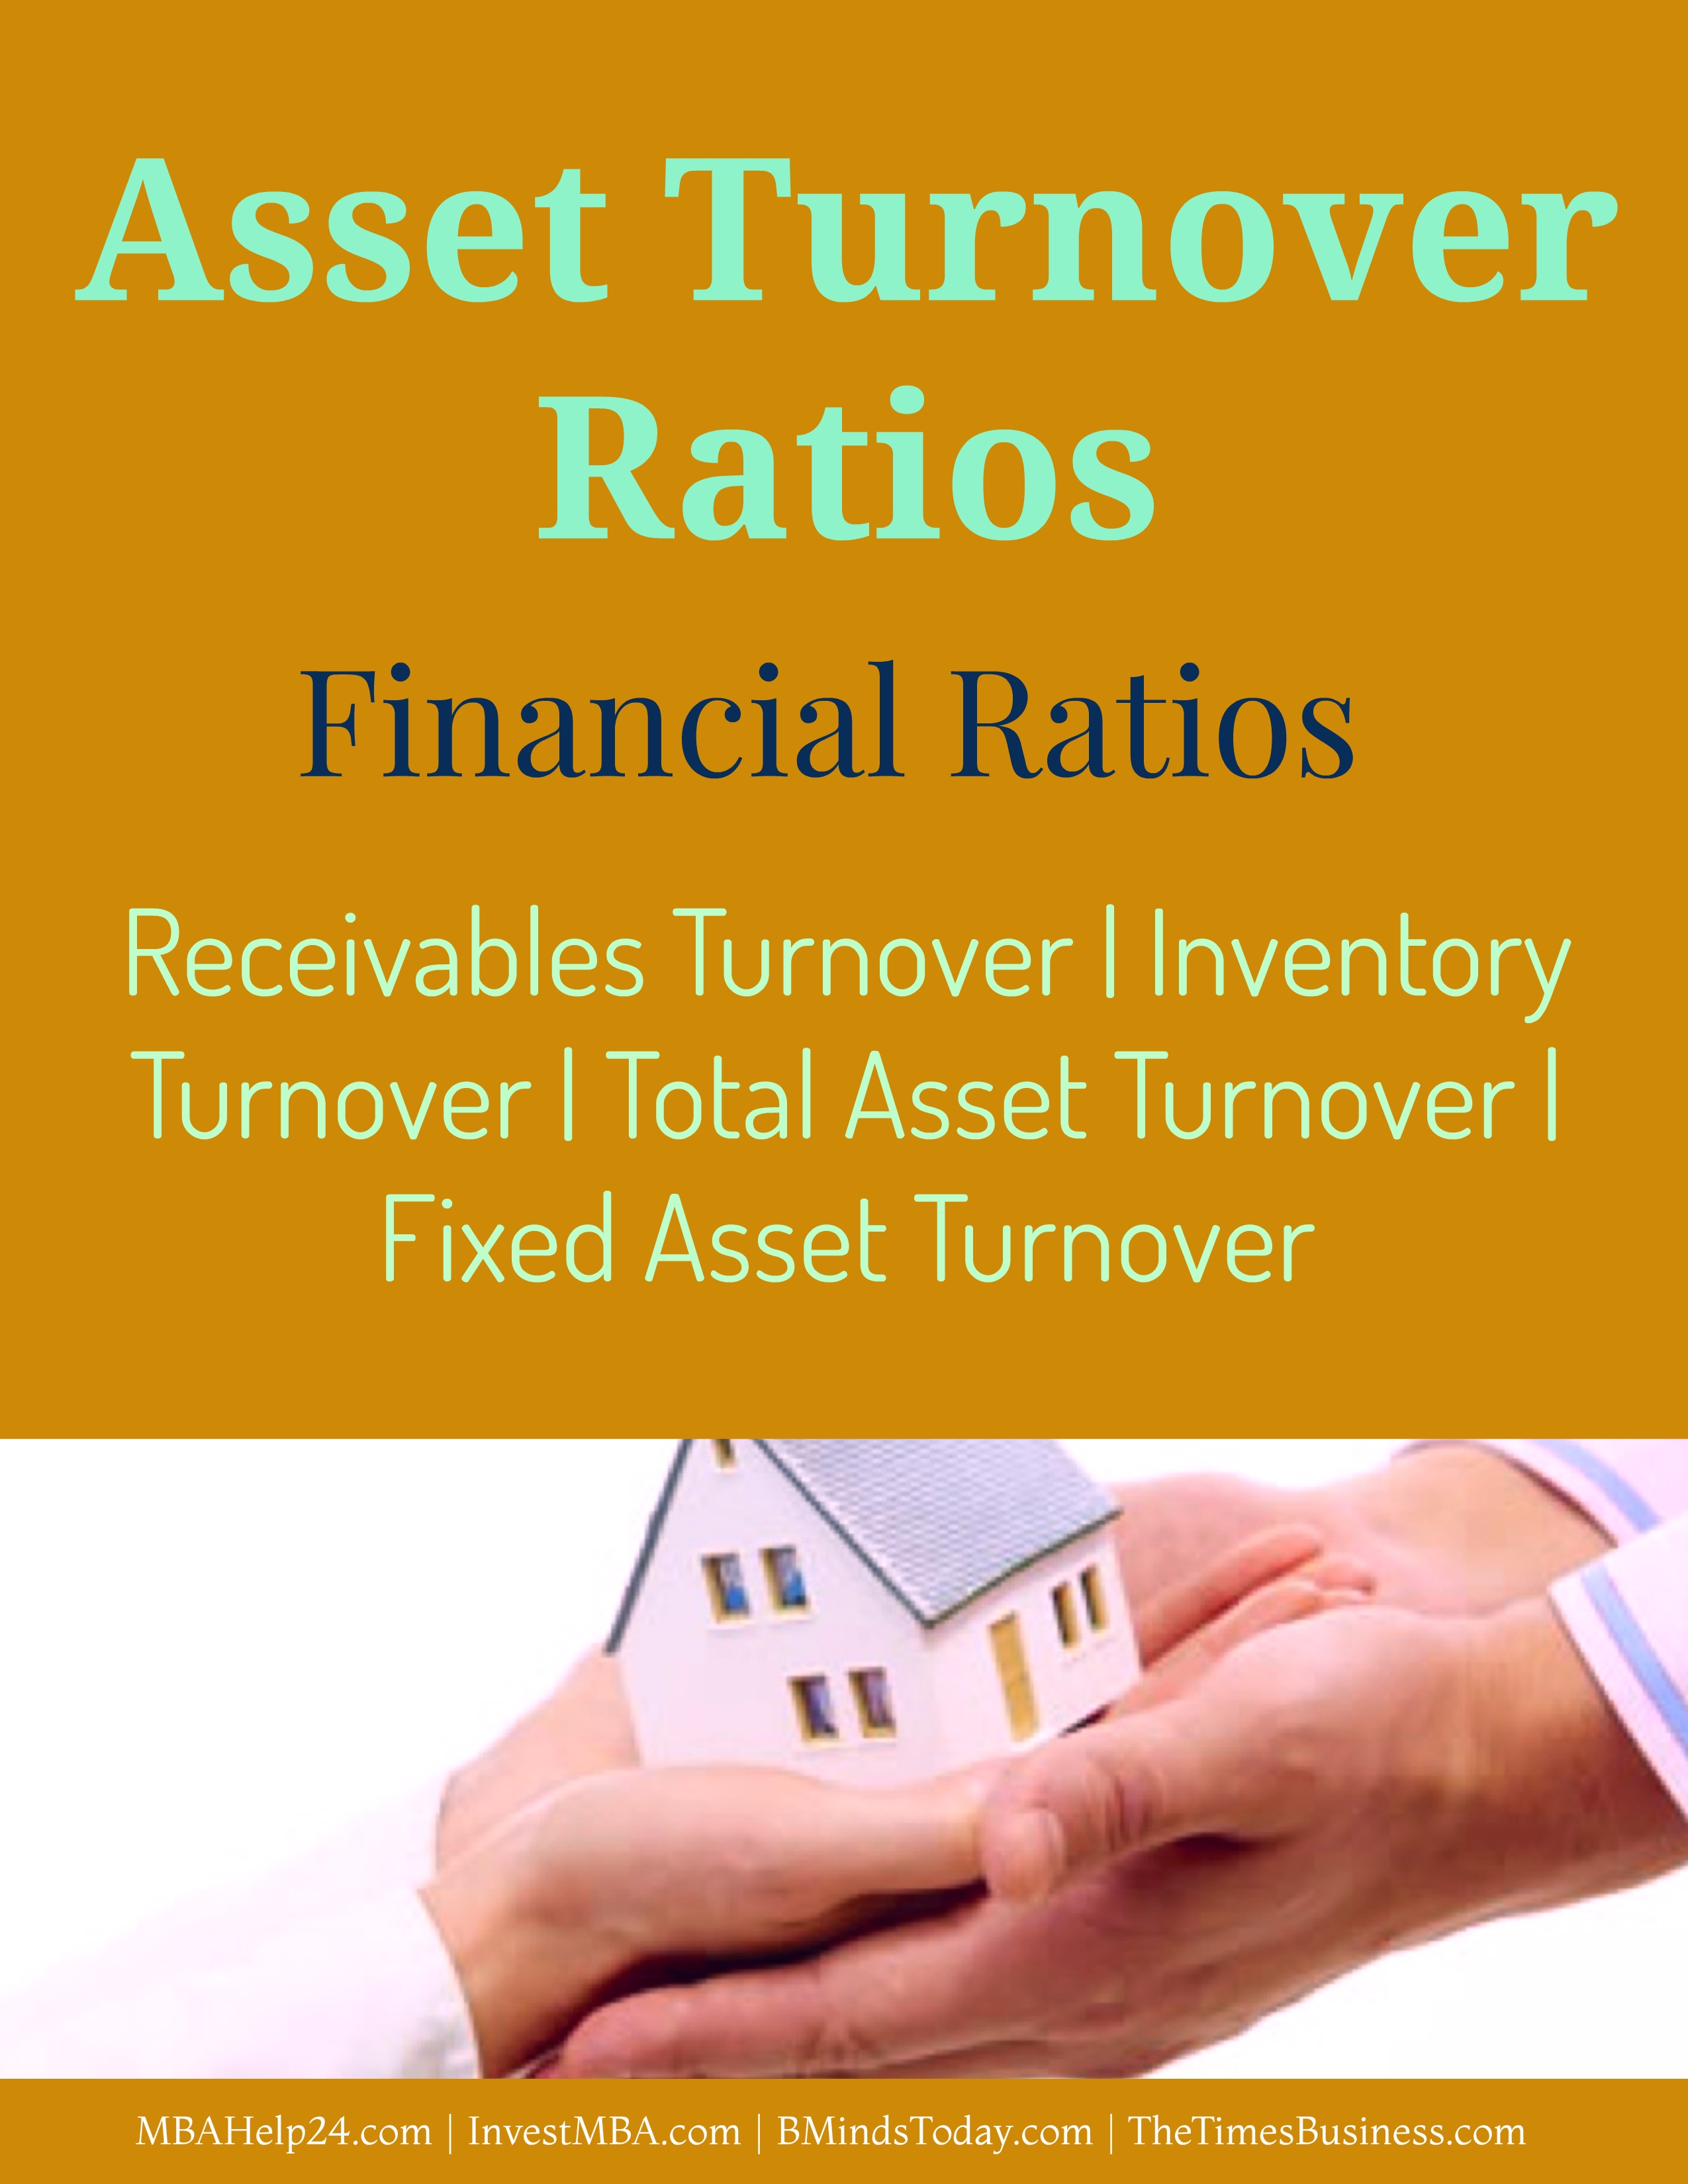 Asset Turnover Ratios- Receivables, Inventory, Total Asset and Fixed Asset Asset Turnover Ratios Asset Turnover Ratios | Receivables | Inventory | Total Asset | Fixed Asset Asset Turnover Ratios Receivables Inventory Total Asset and Fixed Asset Asset Turnover Ratios | Receivables | Inventory | Total Asset Asset Turnover Ratios | Receivables | Inventory | Total Asset Asset Turnover Ratios Receivables Inventory Total Asset and Fixed Asset